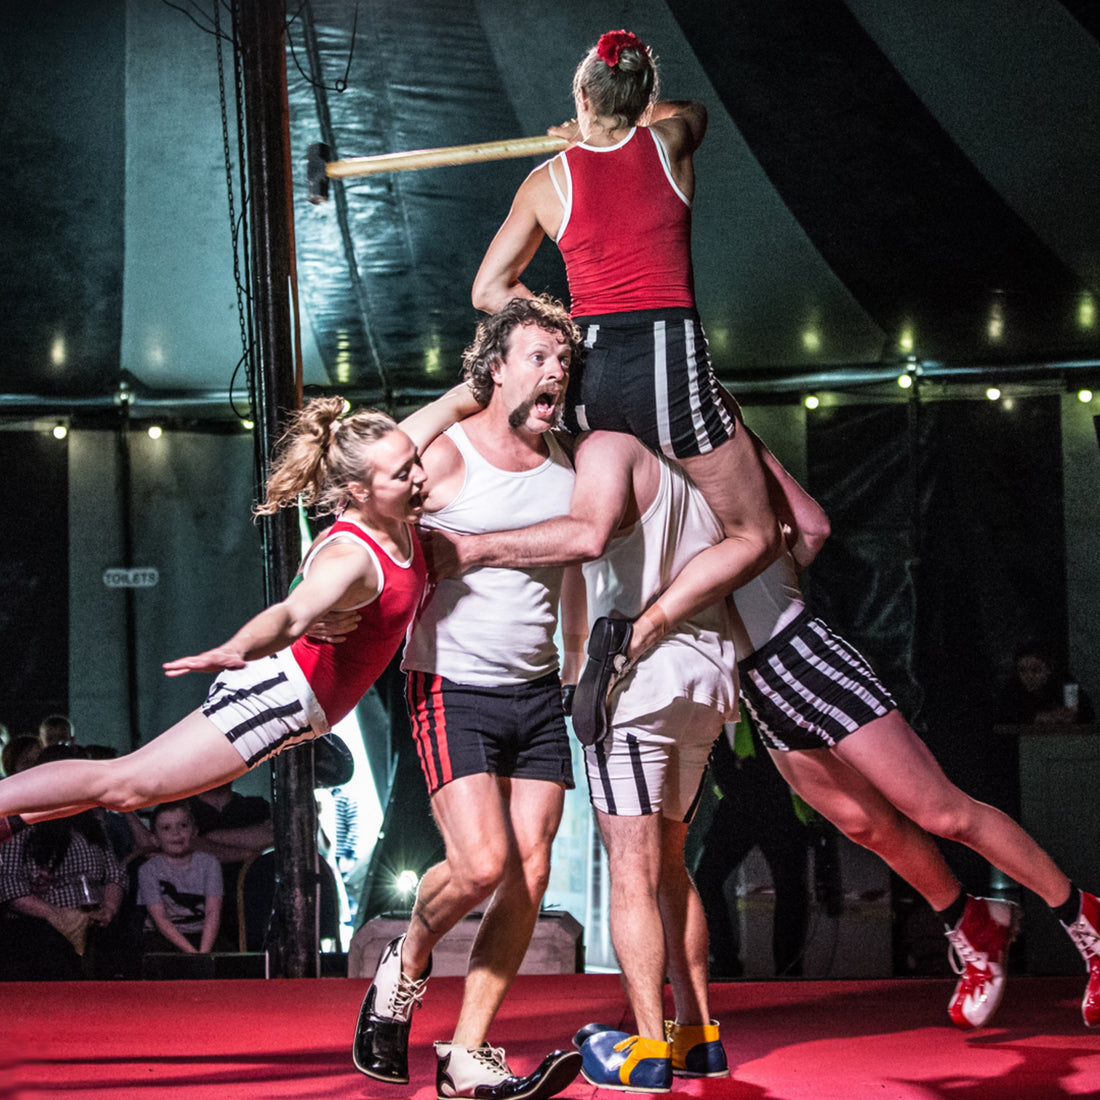 Tumble Circus returns to Belfast’s Writers’ Square this Christmas